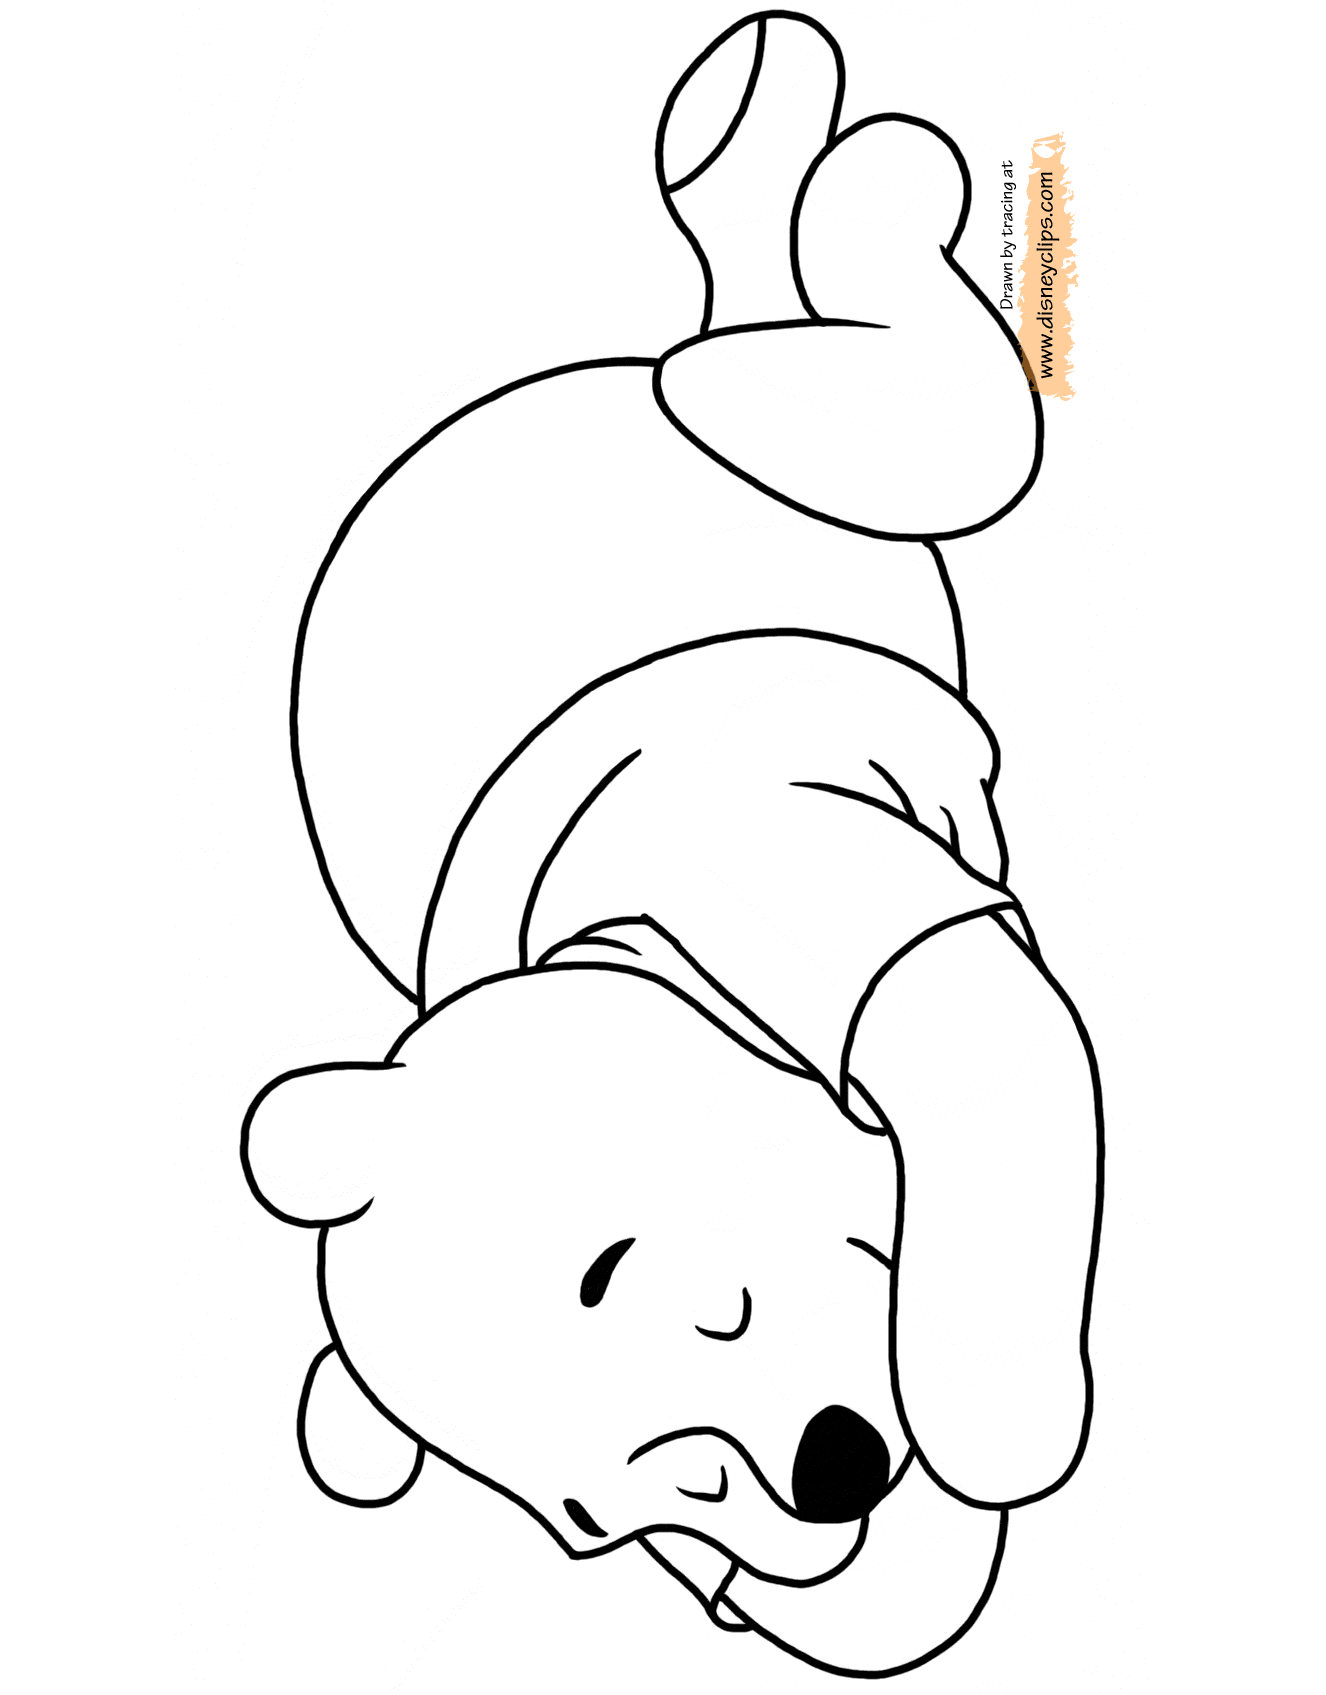 Download Winnie the Pooh Coloring Pages 3 | Disney's World of Wonders